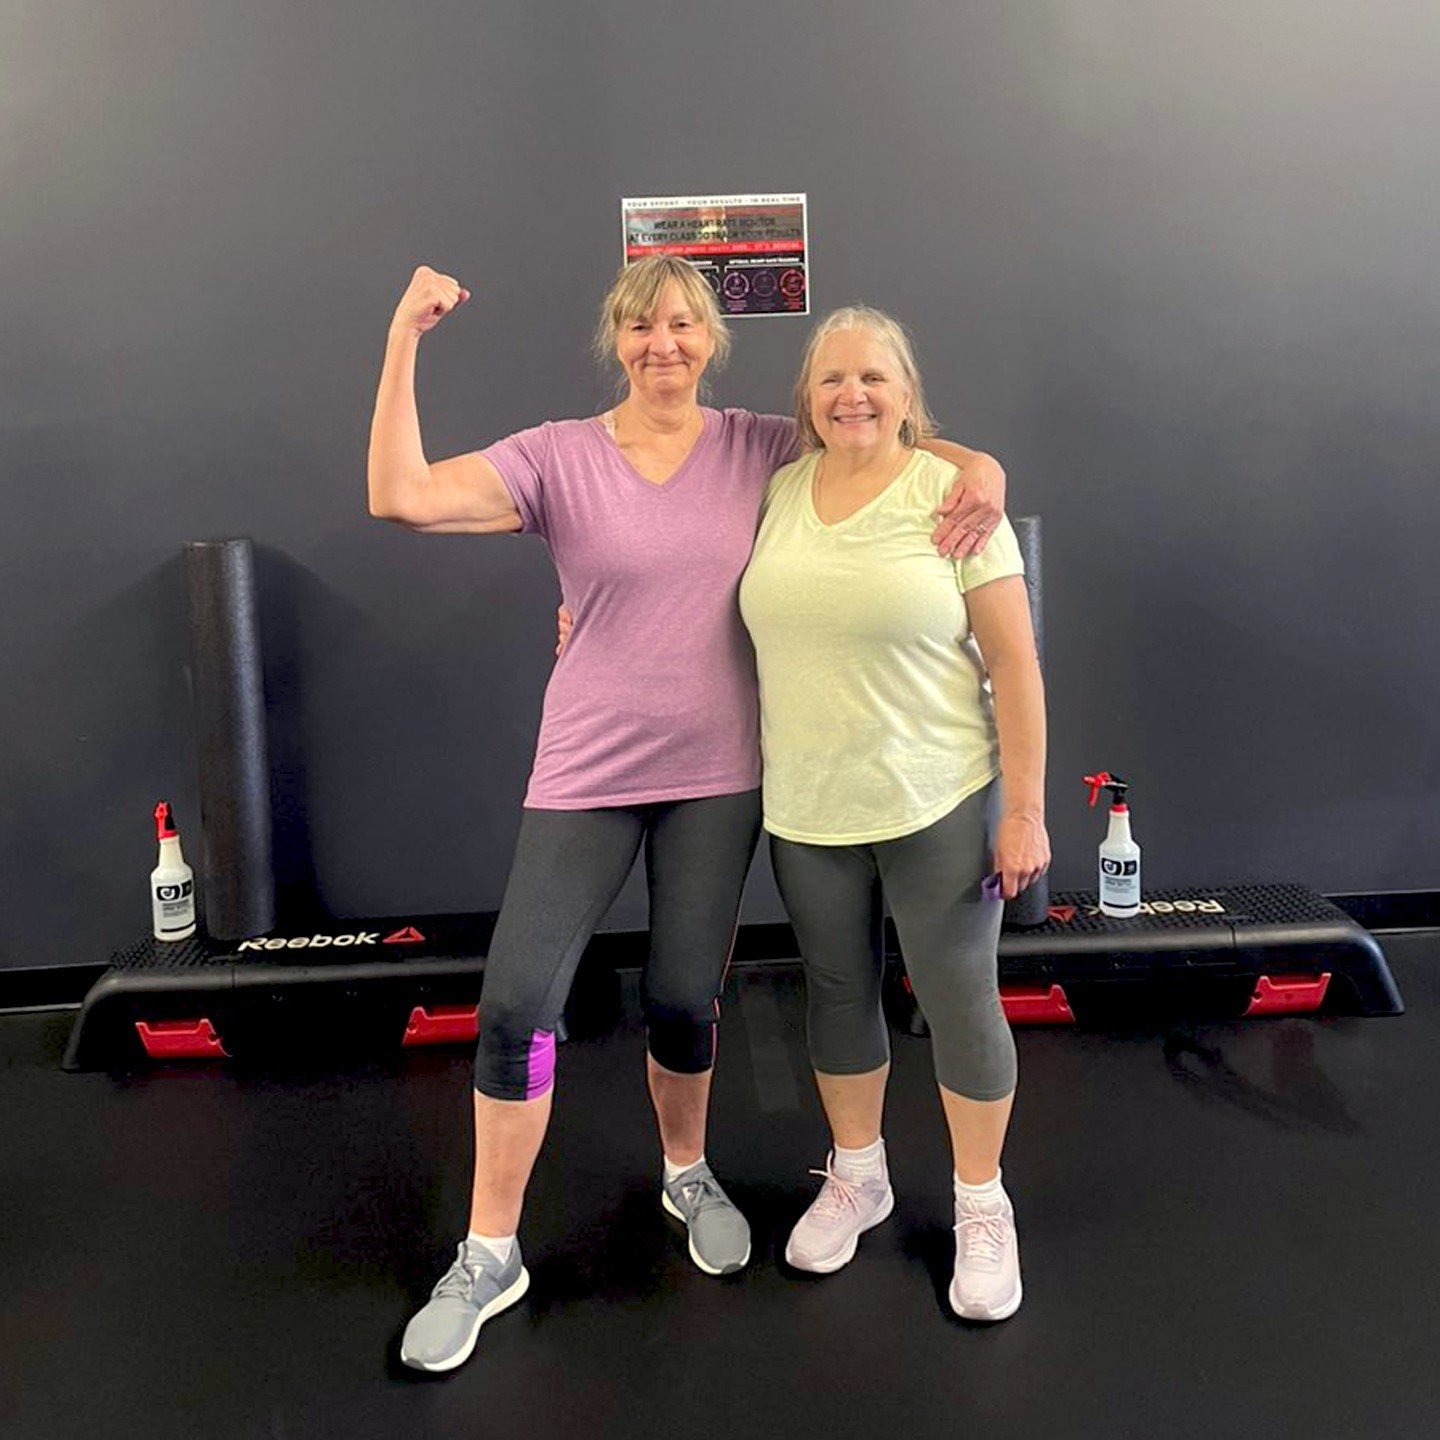 Squad Goals: Pat &amp; Diane are Crushing It! 🙌
We love seeing our #F3fitfam working out together!  Big shoutout to Pat &amp; Diane who absolutely crushed their workout this morning!  Leaving the gym feeling stronger and ready to conquer the day! 💪